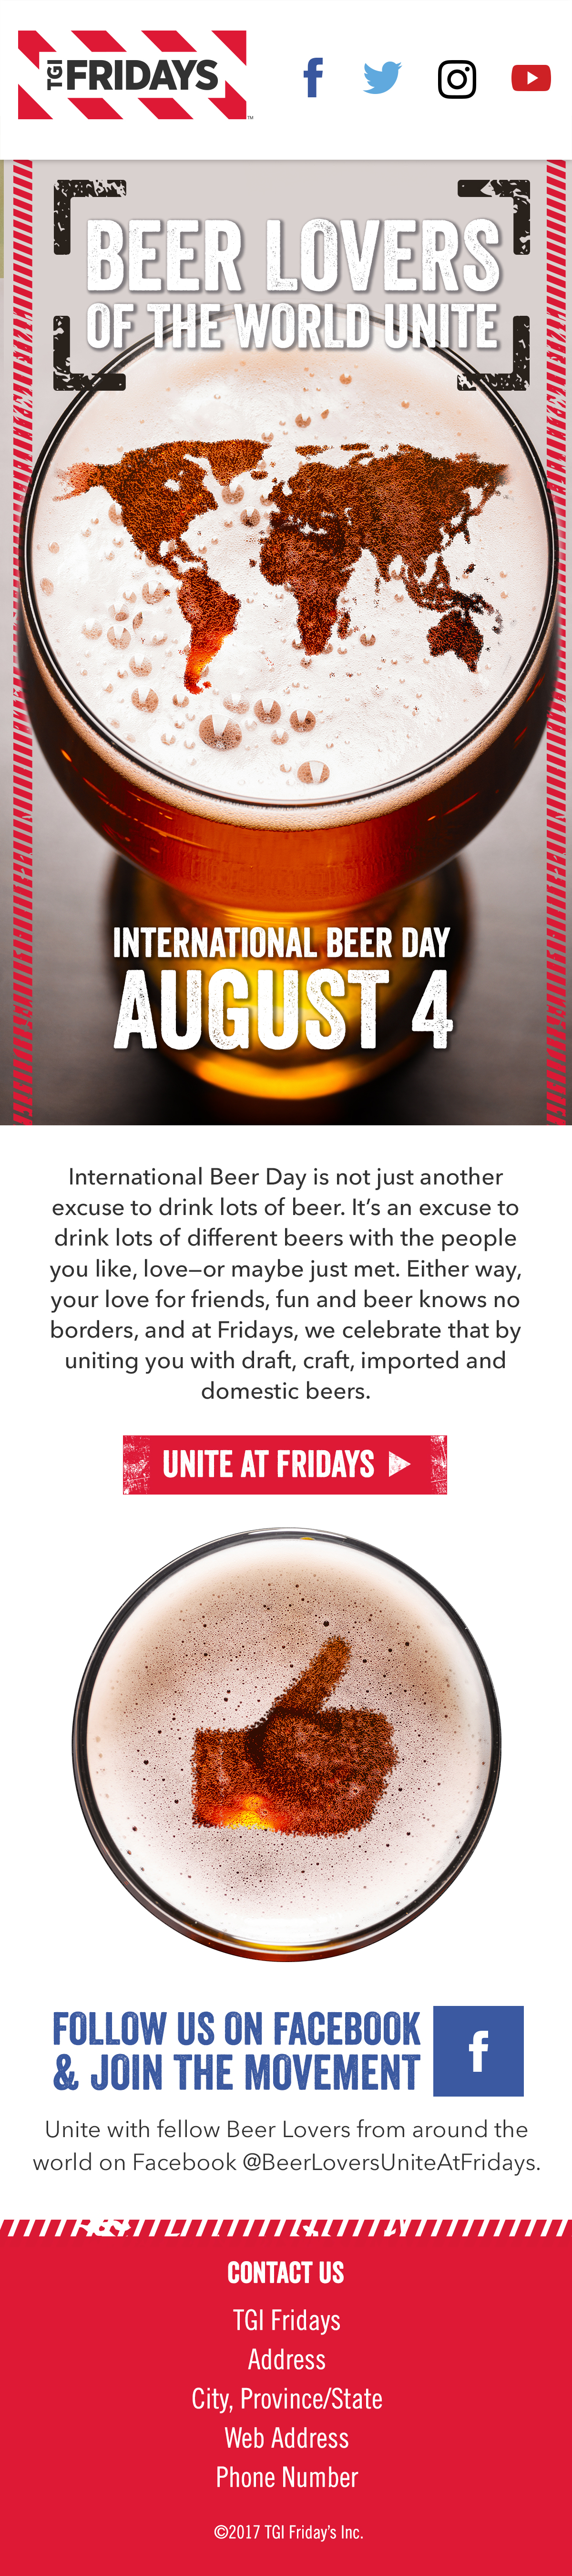 International Beer Day promotion - Agency Creative advertising agency Dallas TX